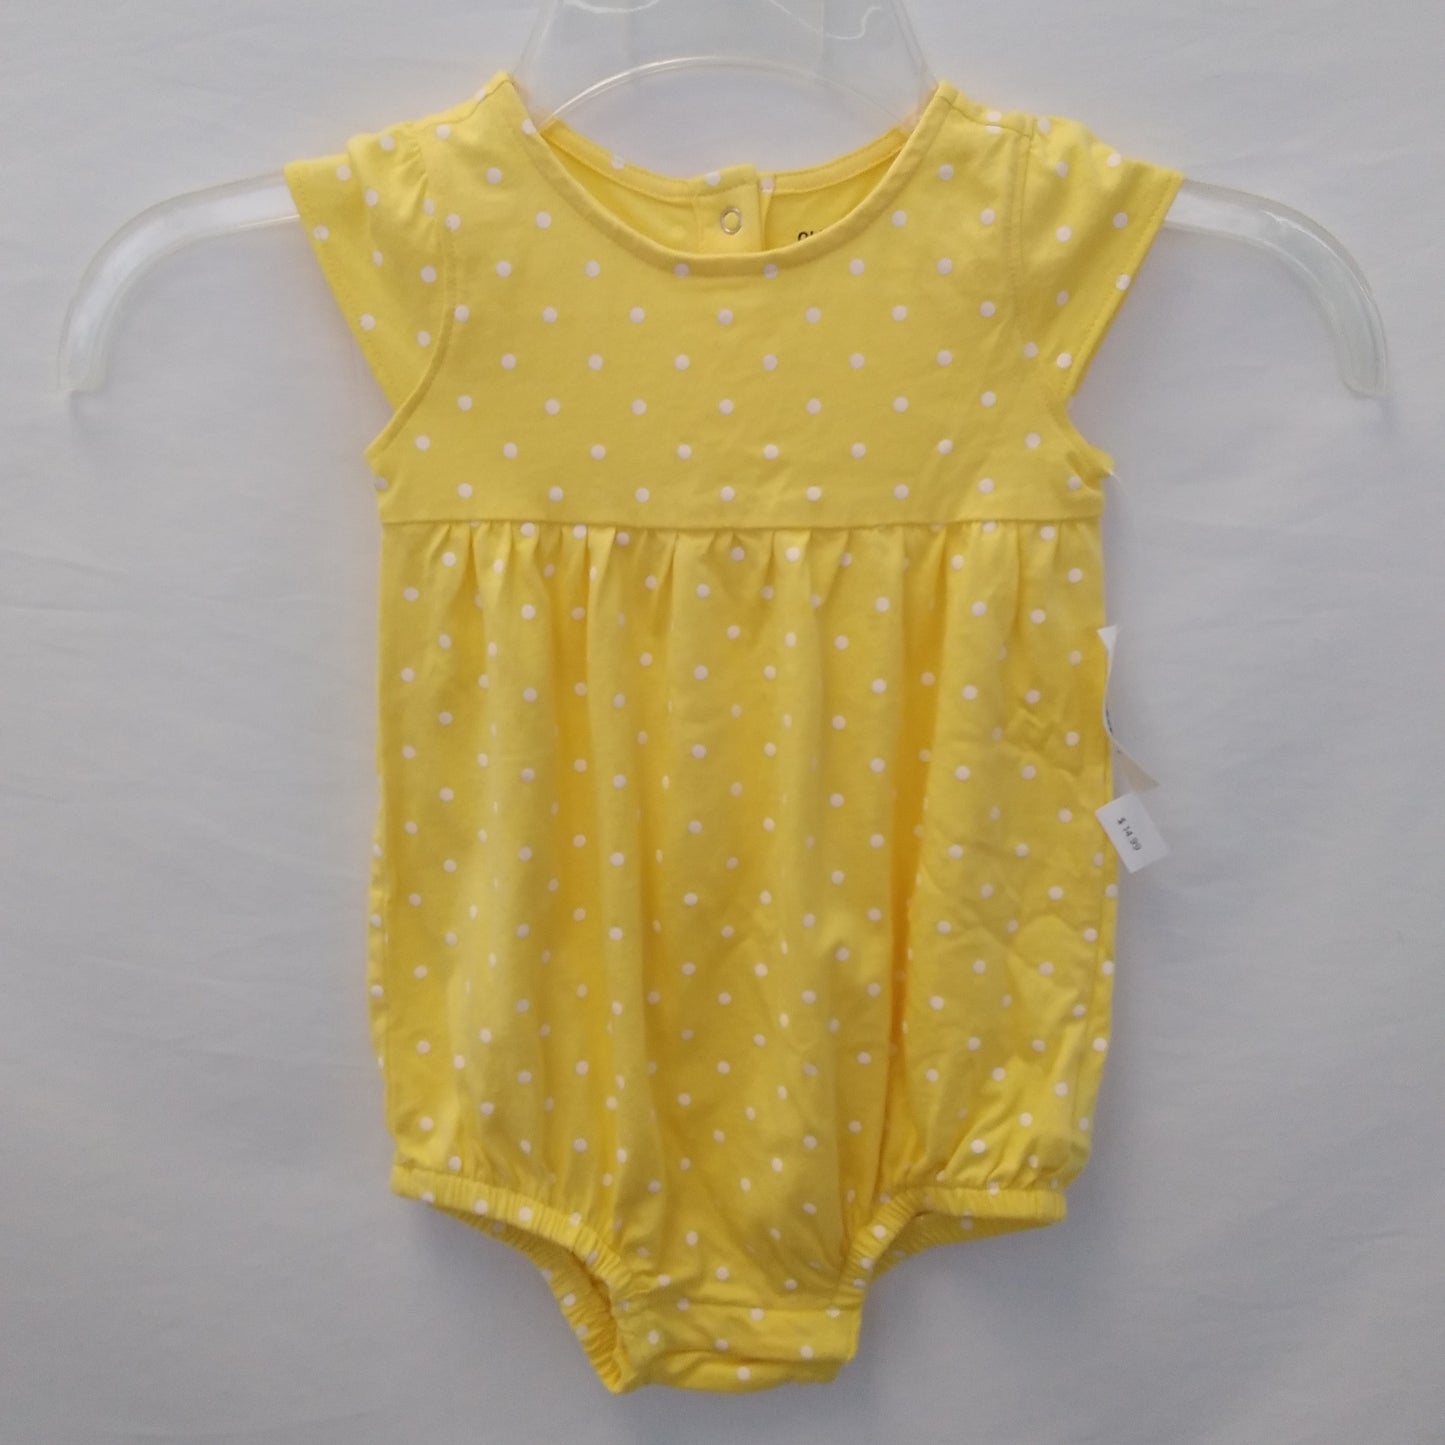 NWT - Old Navy Infant's Yellow Polka Dot Bodysuit - 12-18 Months